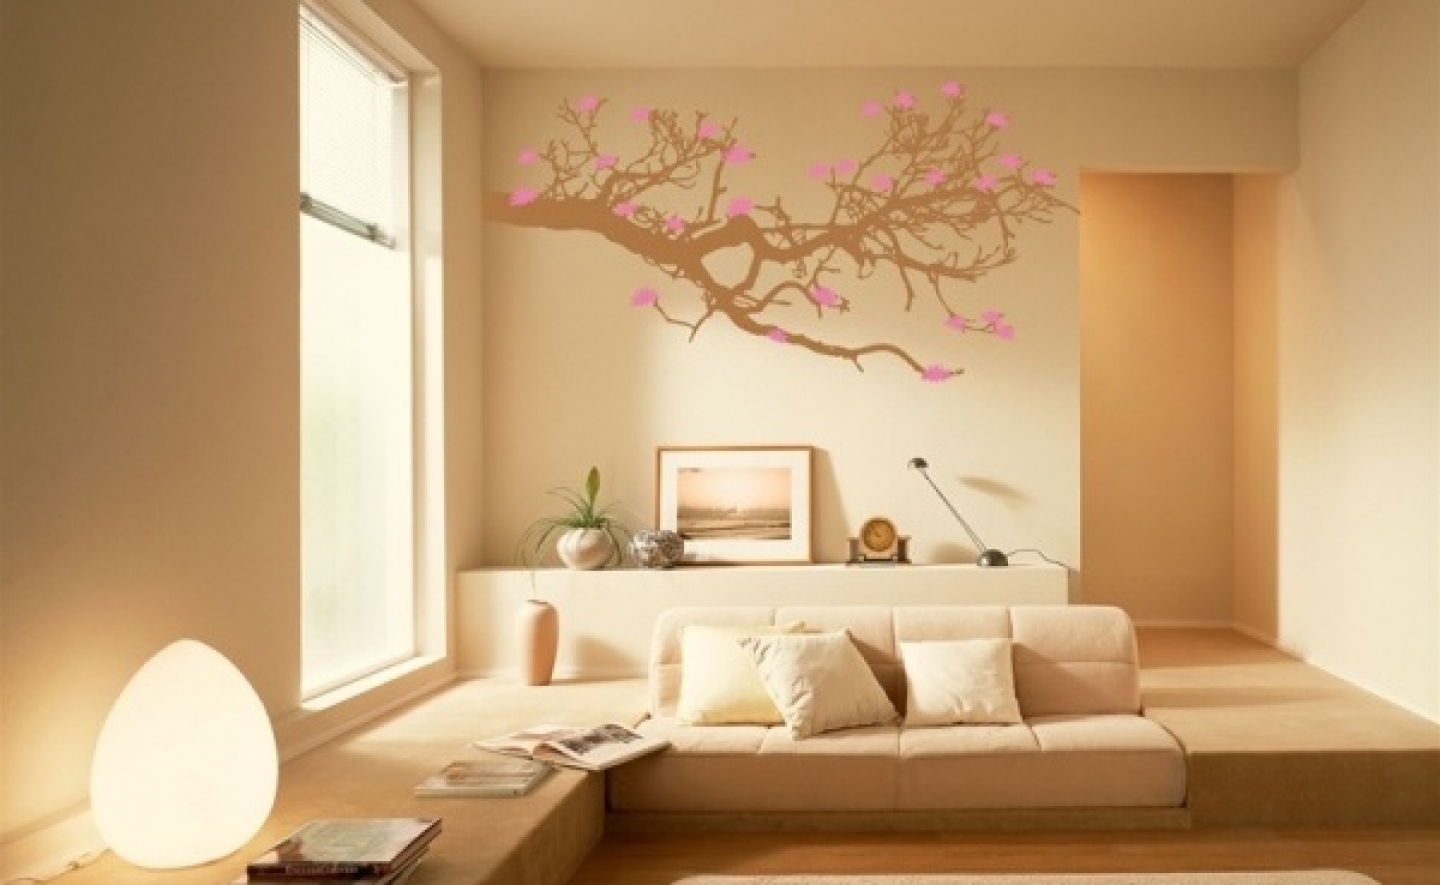 Design A Wall With Pictures For Painting Ideas